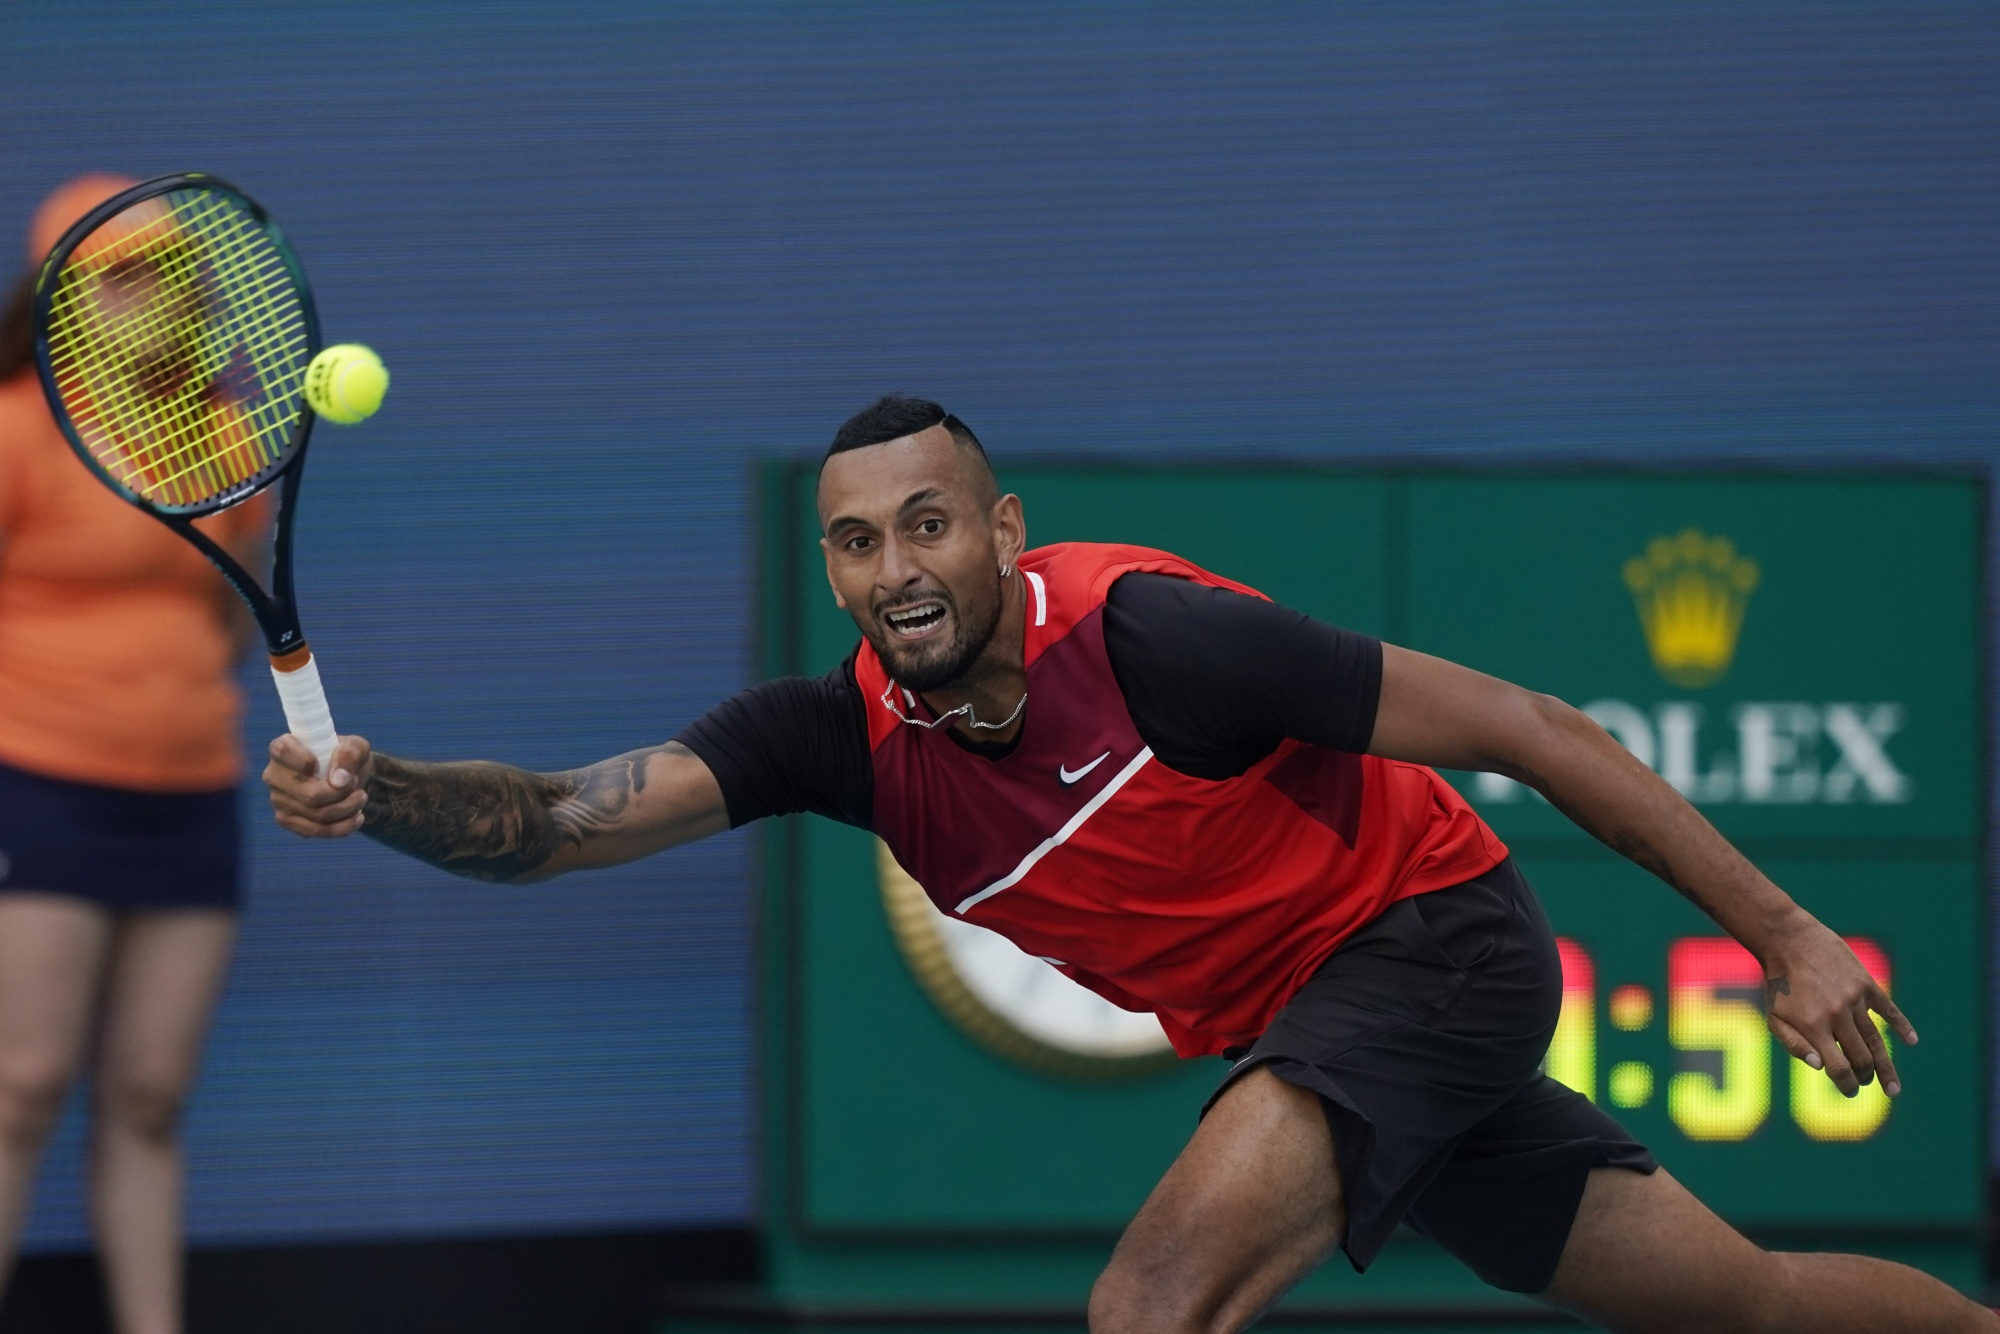 Nick Kyrgios Docked Point, Then Game, And Falls At Miami Open